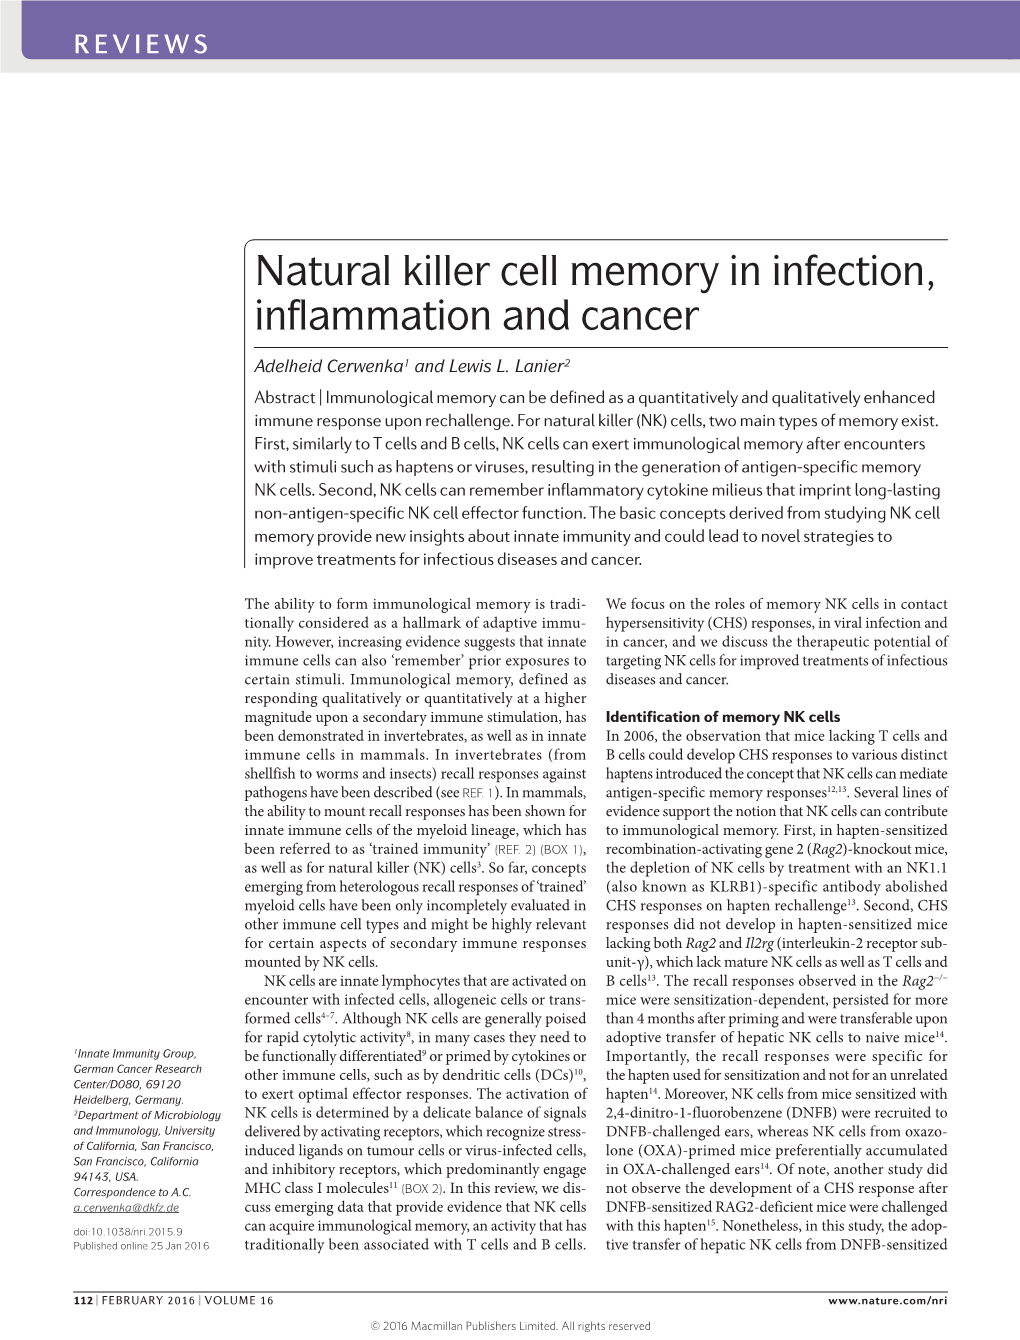 Natural Killer Cell Memory in Infection, Inflammation and Cancer